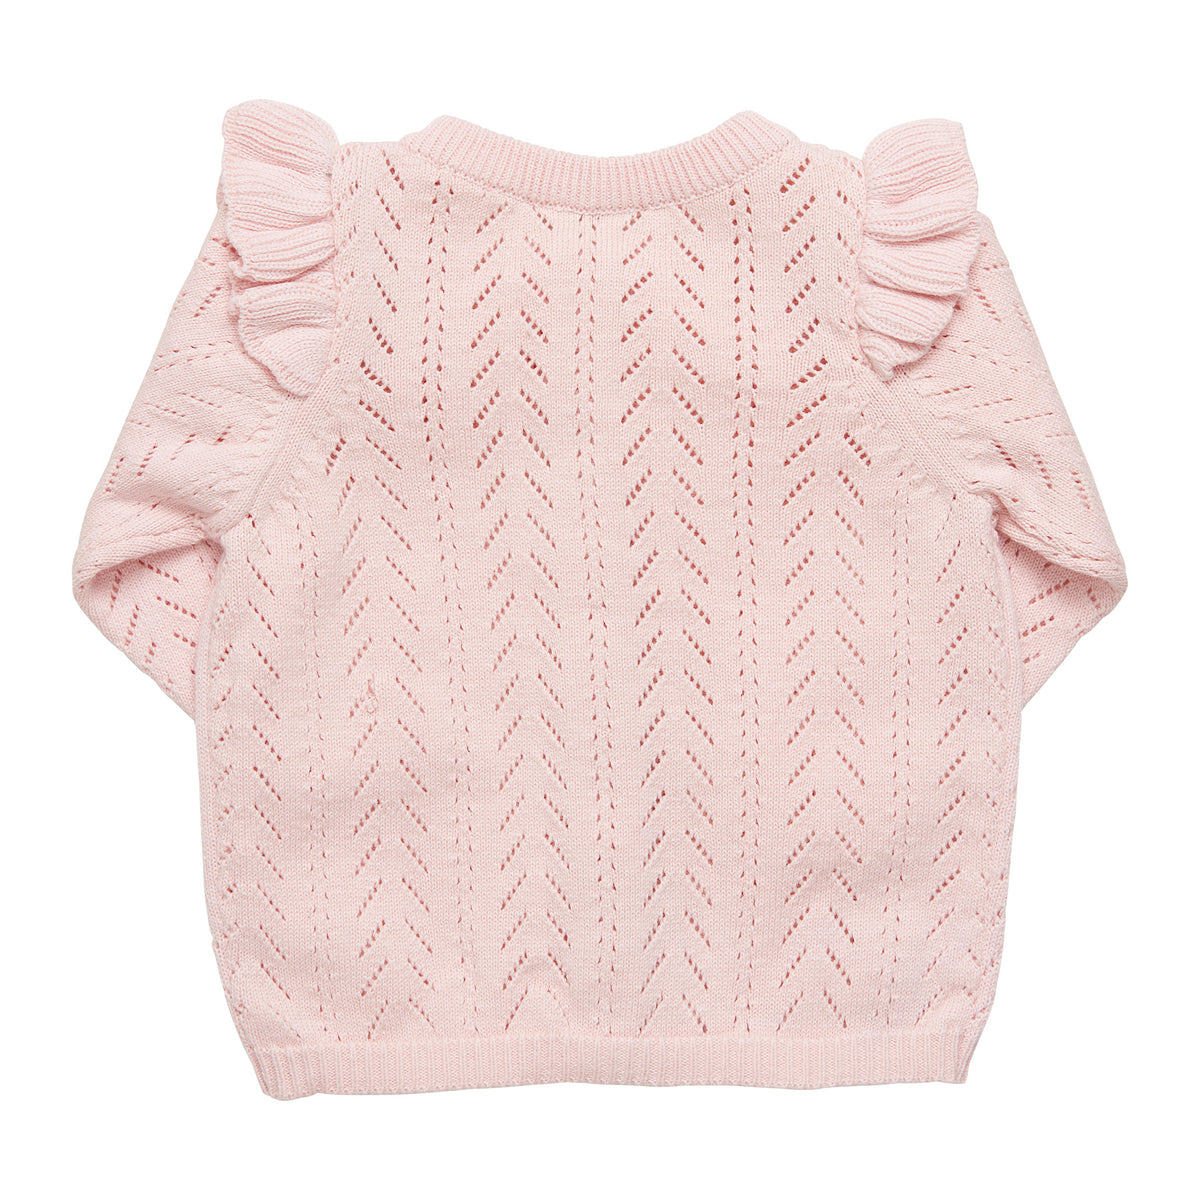 Knit Cardigan with Wooden Button Details, Peachy Pink